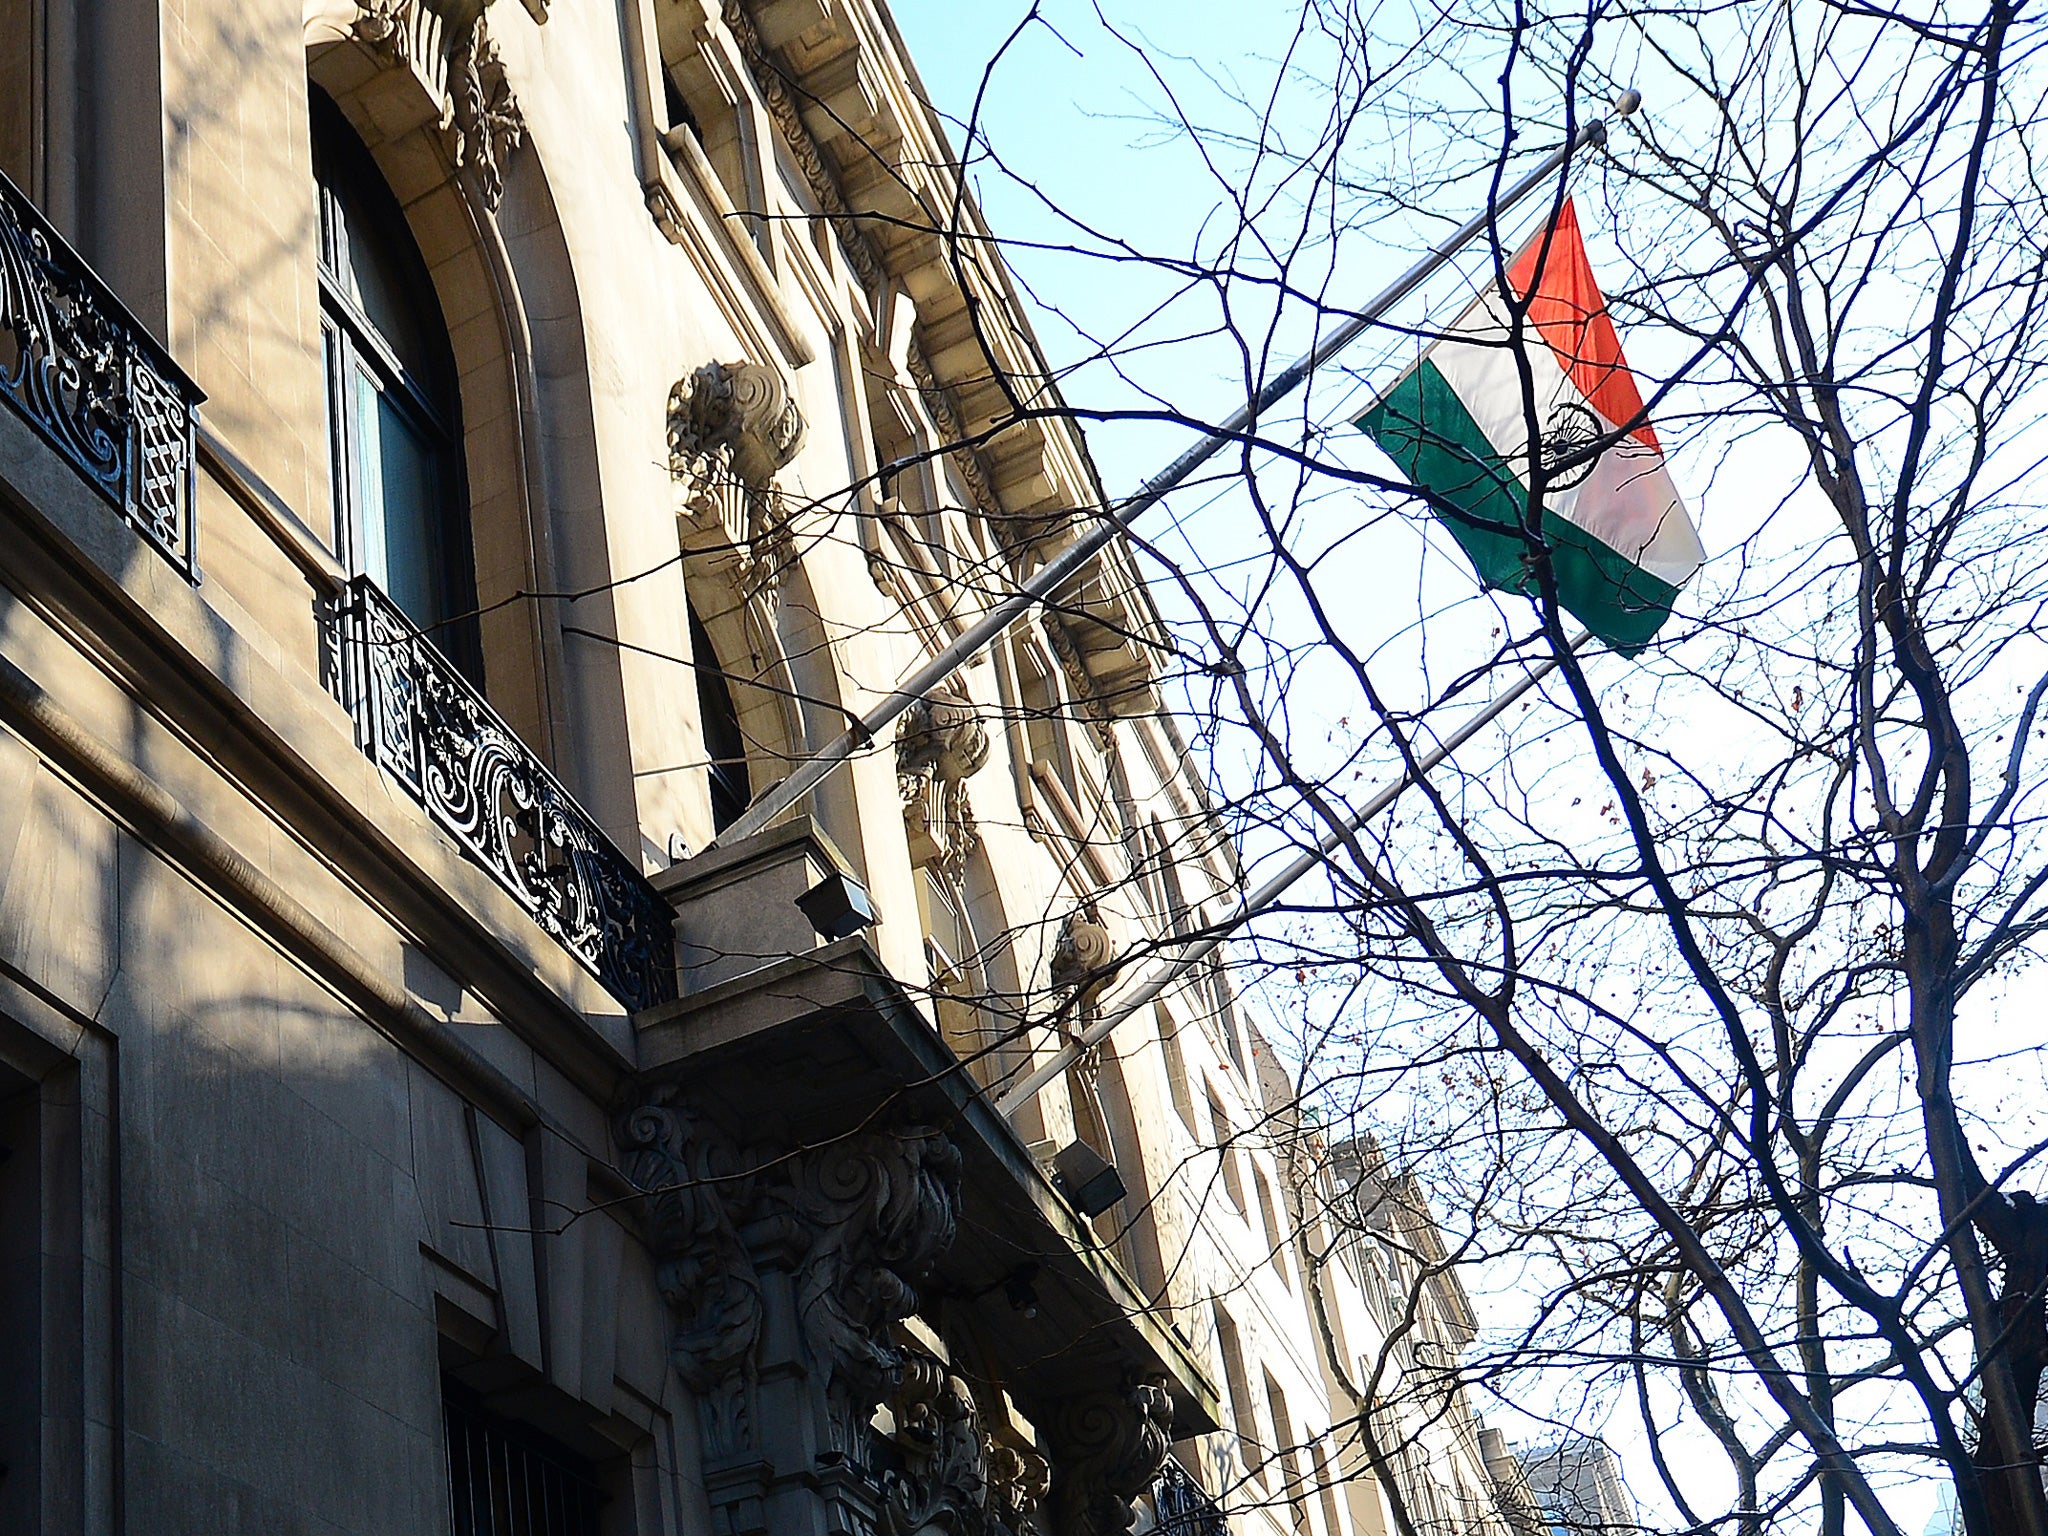 India's consulate general in New York